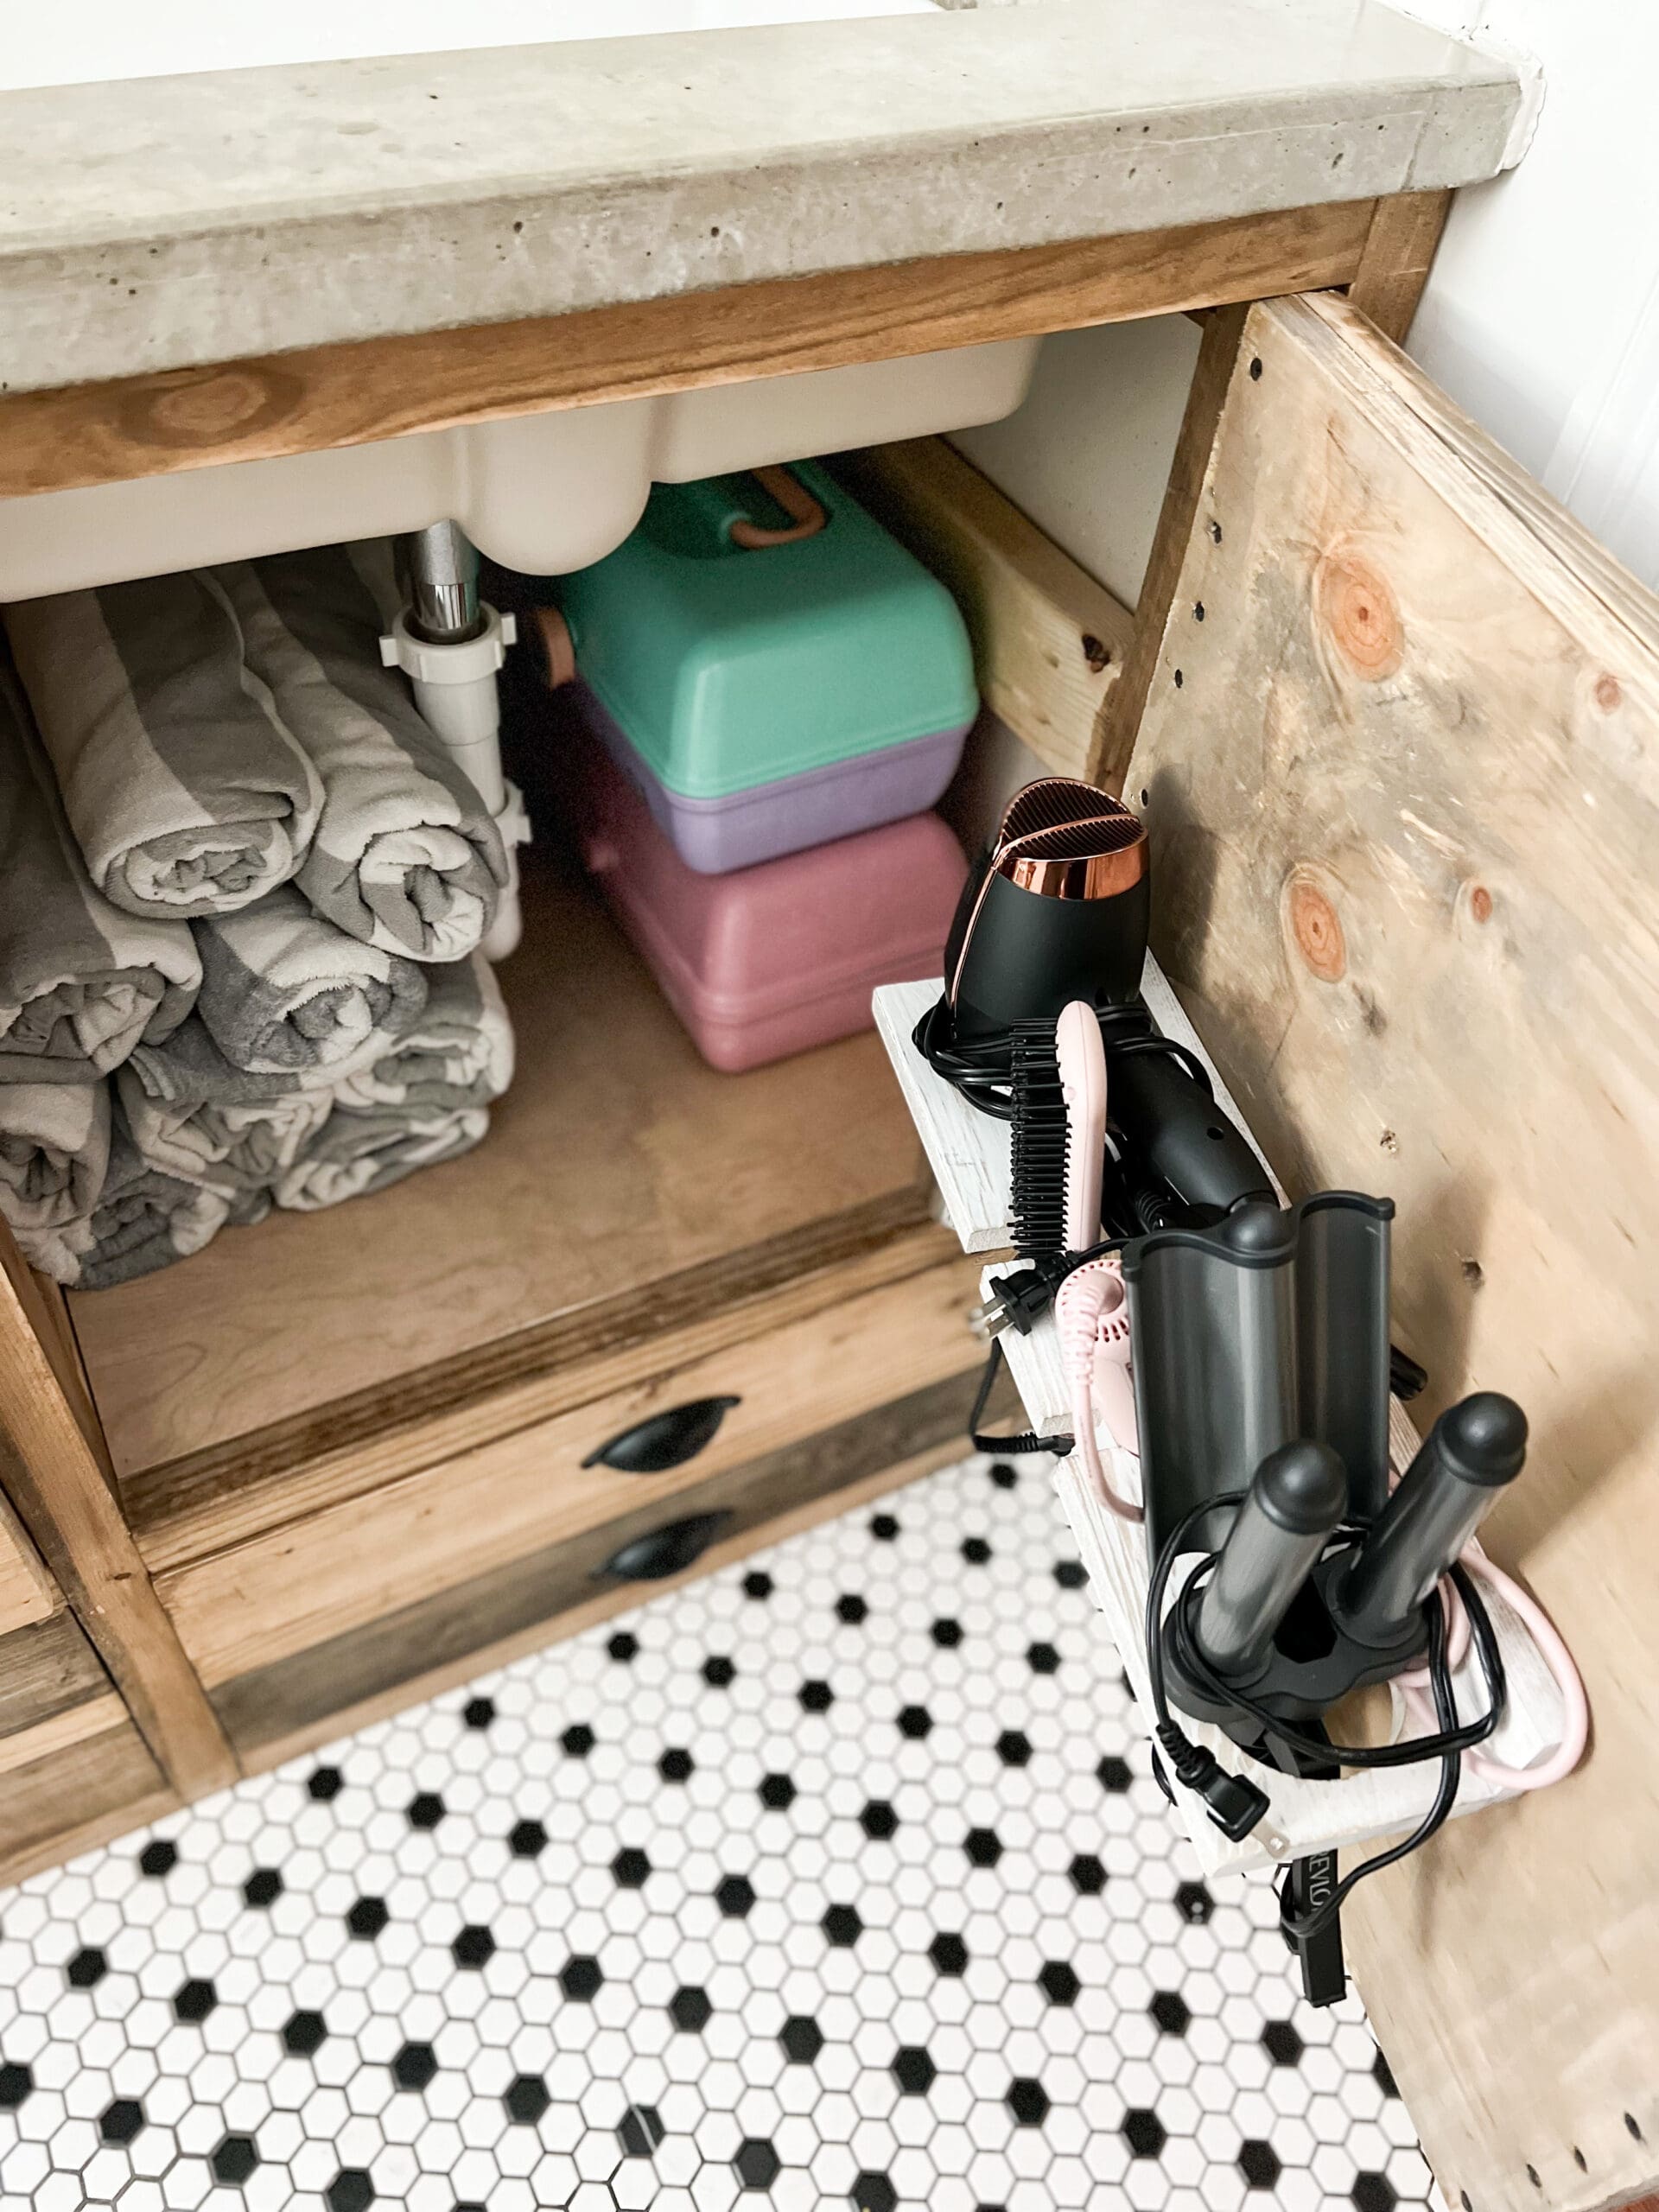 With cabinet door open, neatly rolled up gray and white pools towels are seen. Hair dryer and other accessories fit in a white holder screwed to the back of the cabinet door.